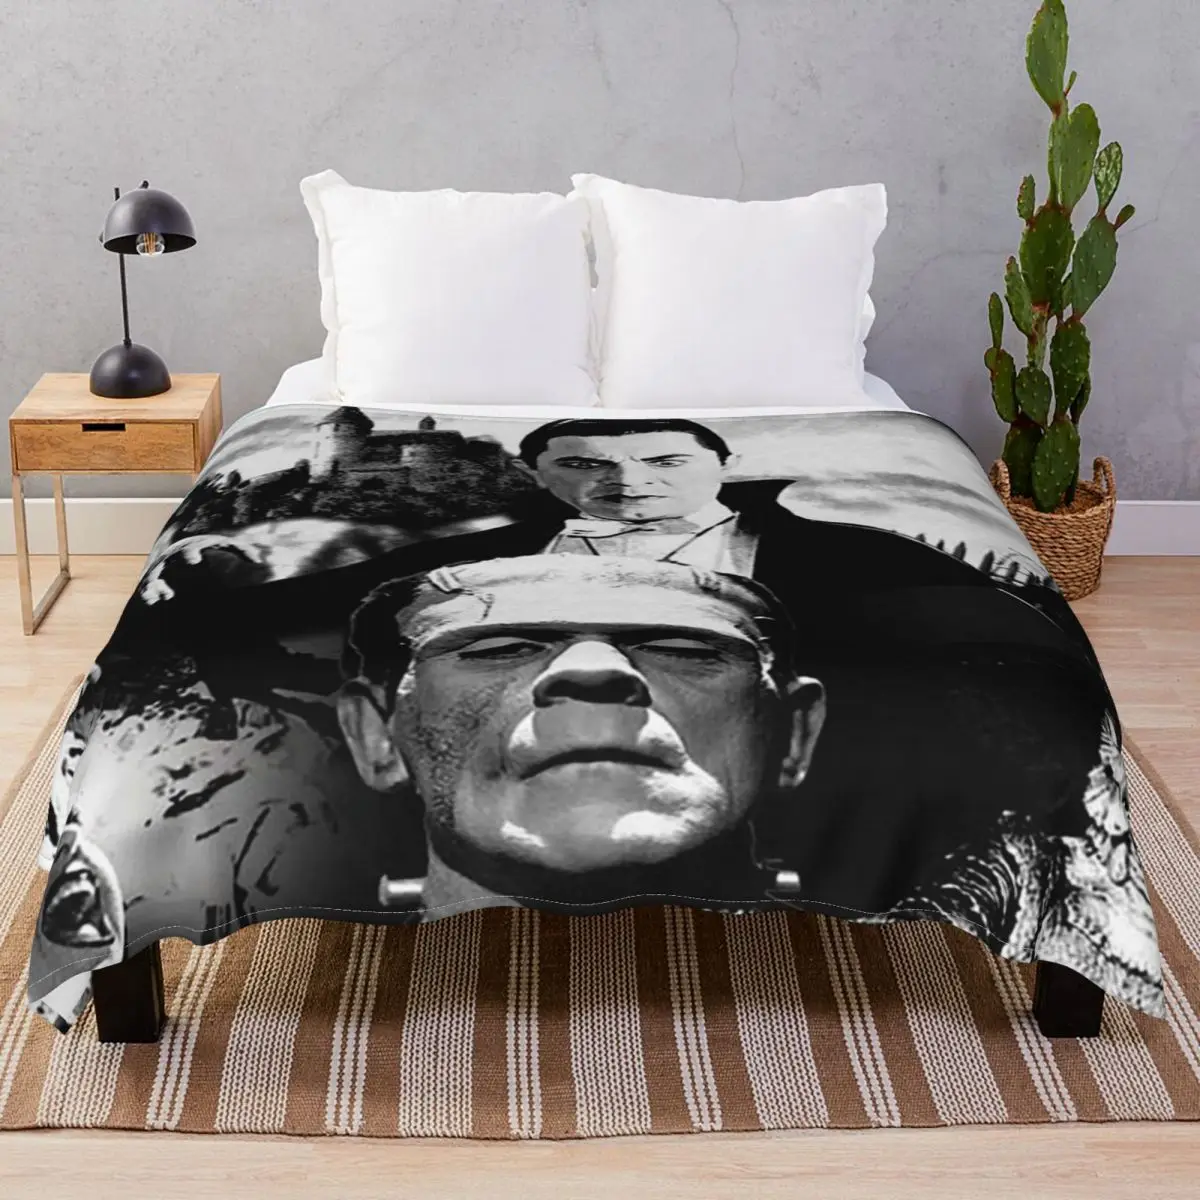 Universal Classic Monsters Blankets Fleece Autumn Portable Throw Blanket for Bed Sofa Camp Cinema